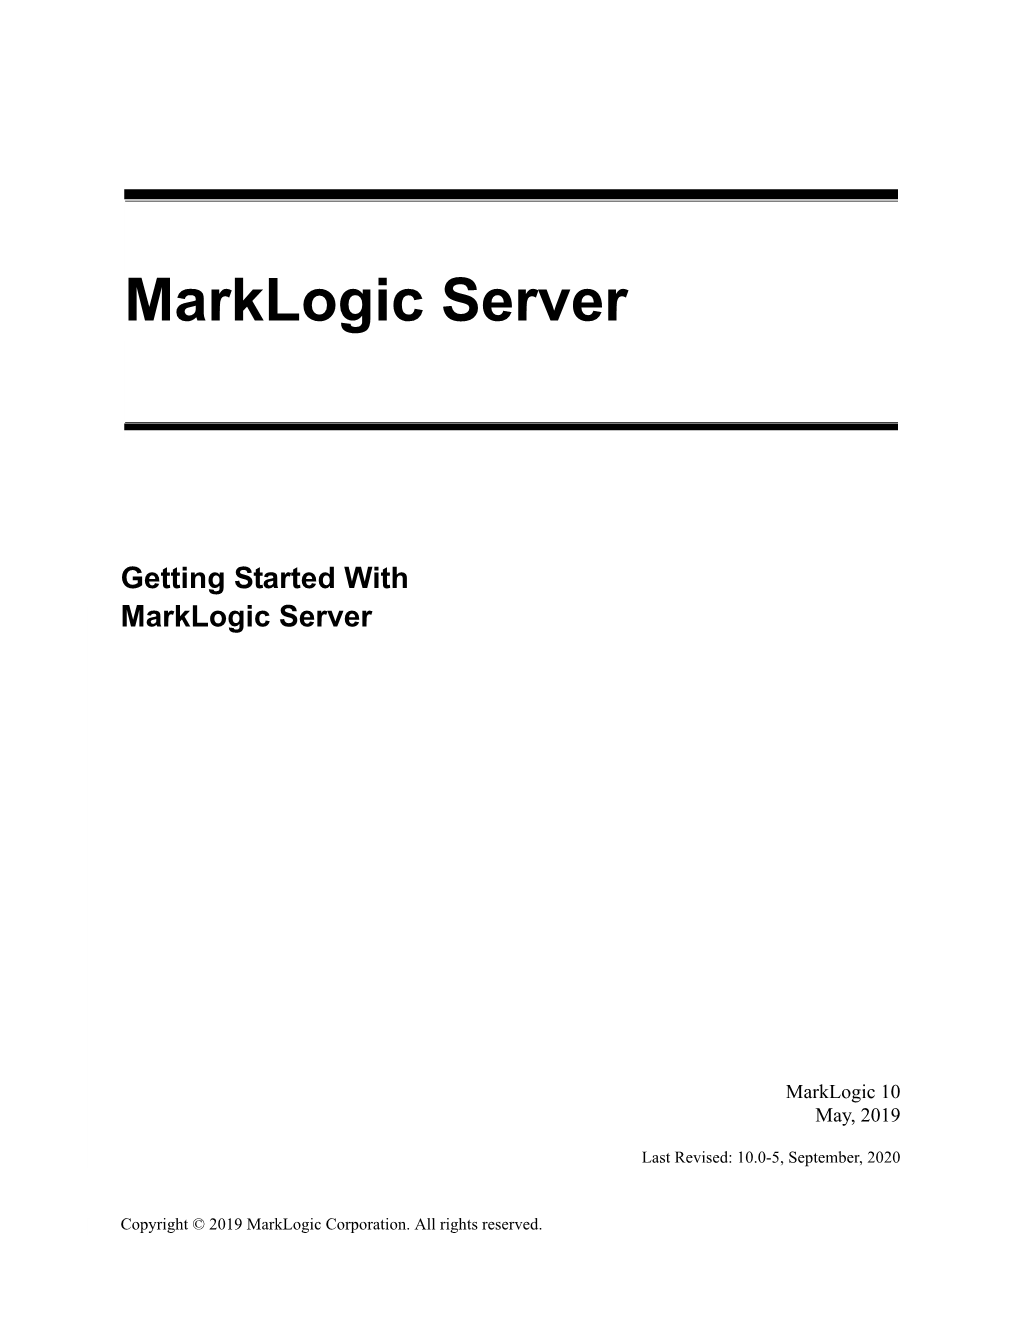 Getting Started with Marklogic Server